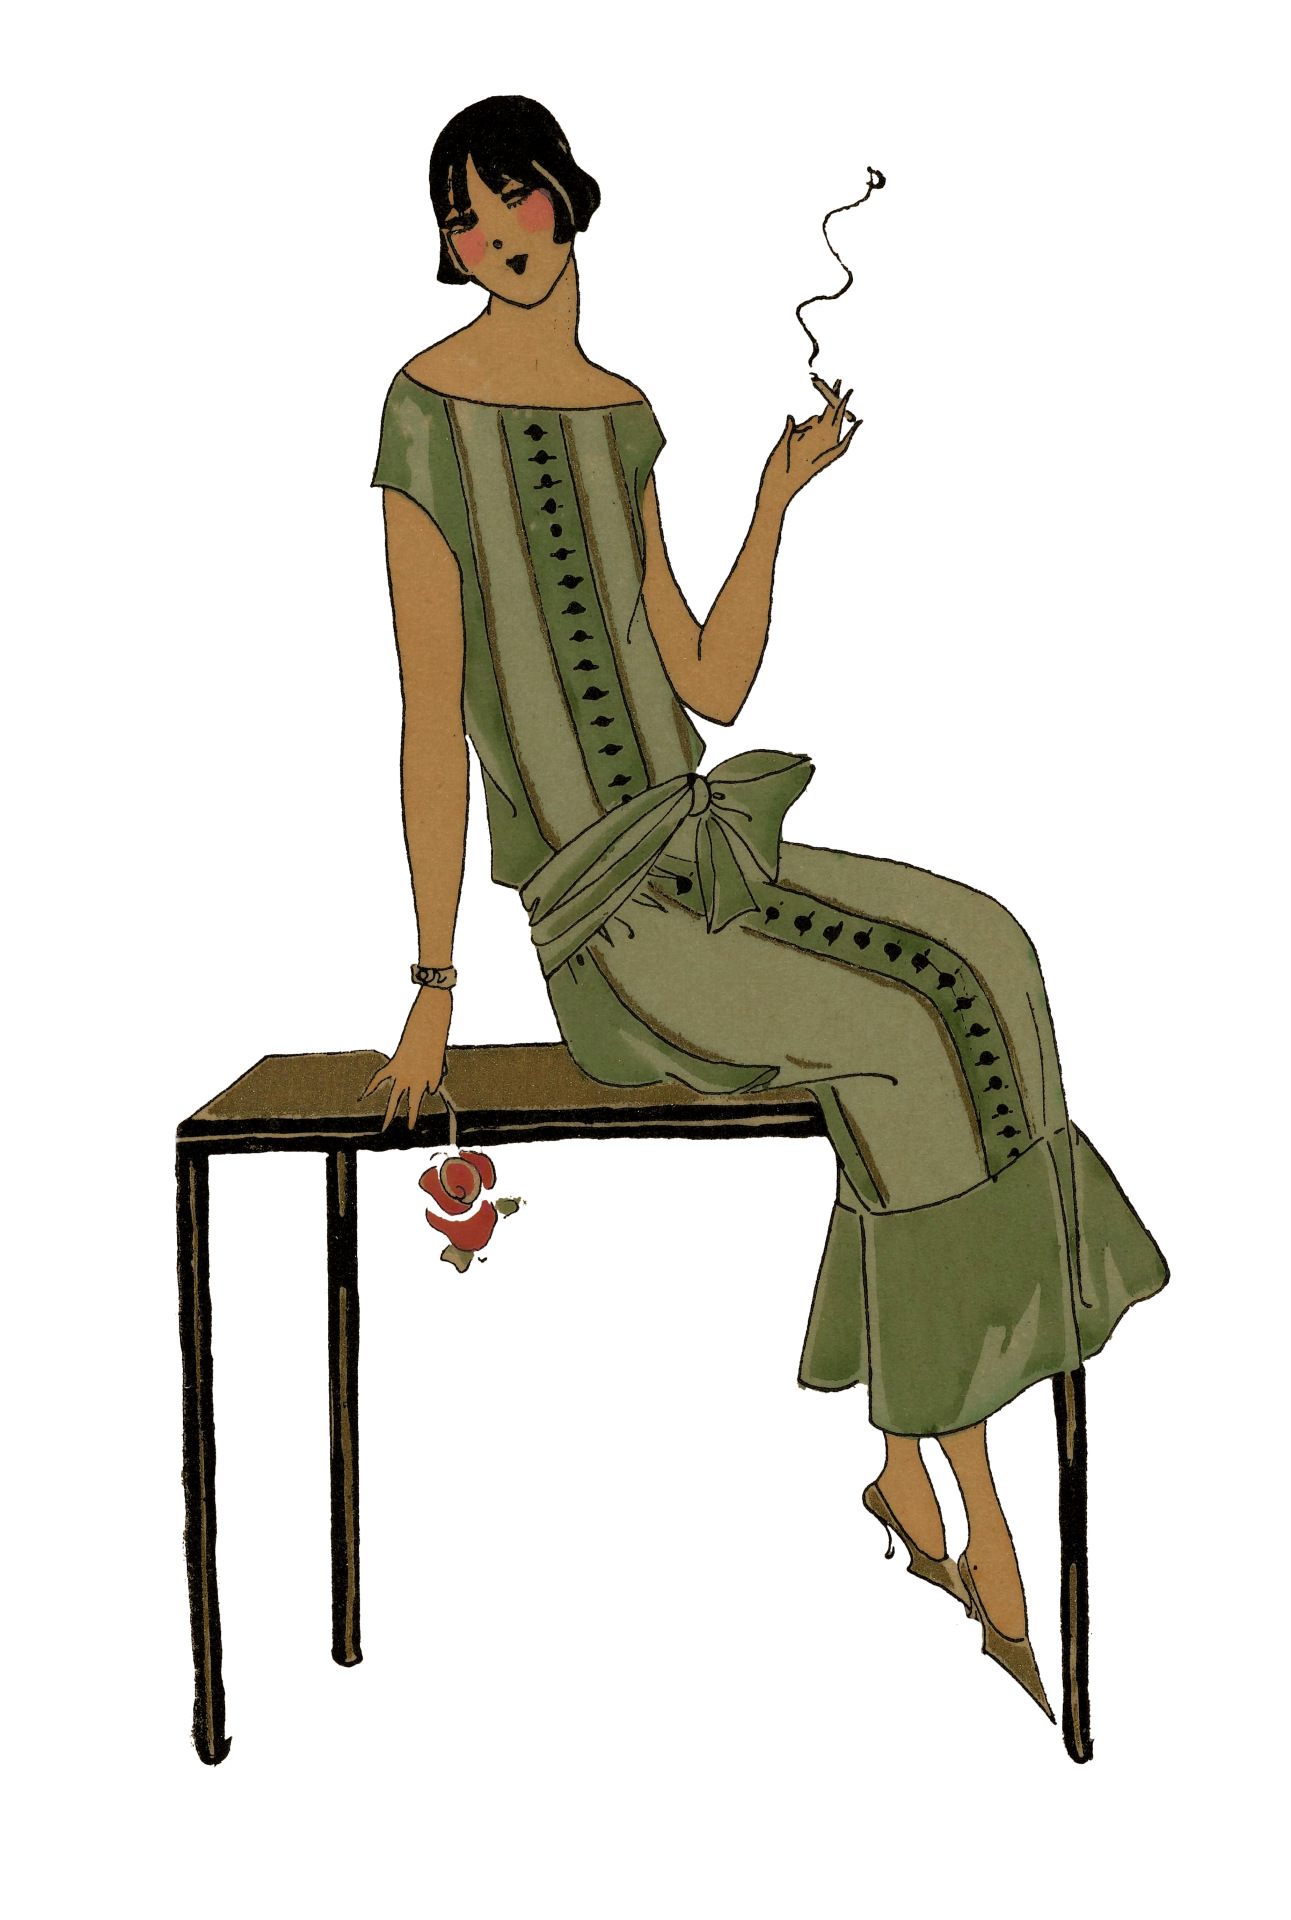 Vintage fashion flapper women sitting on table smoking a cigarette from 1920s in paris couture clipart on transparent png backgroundt